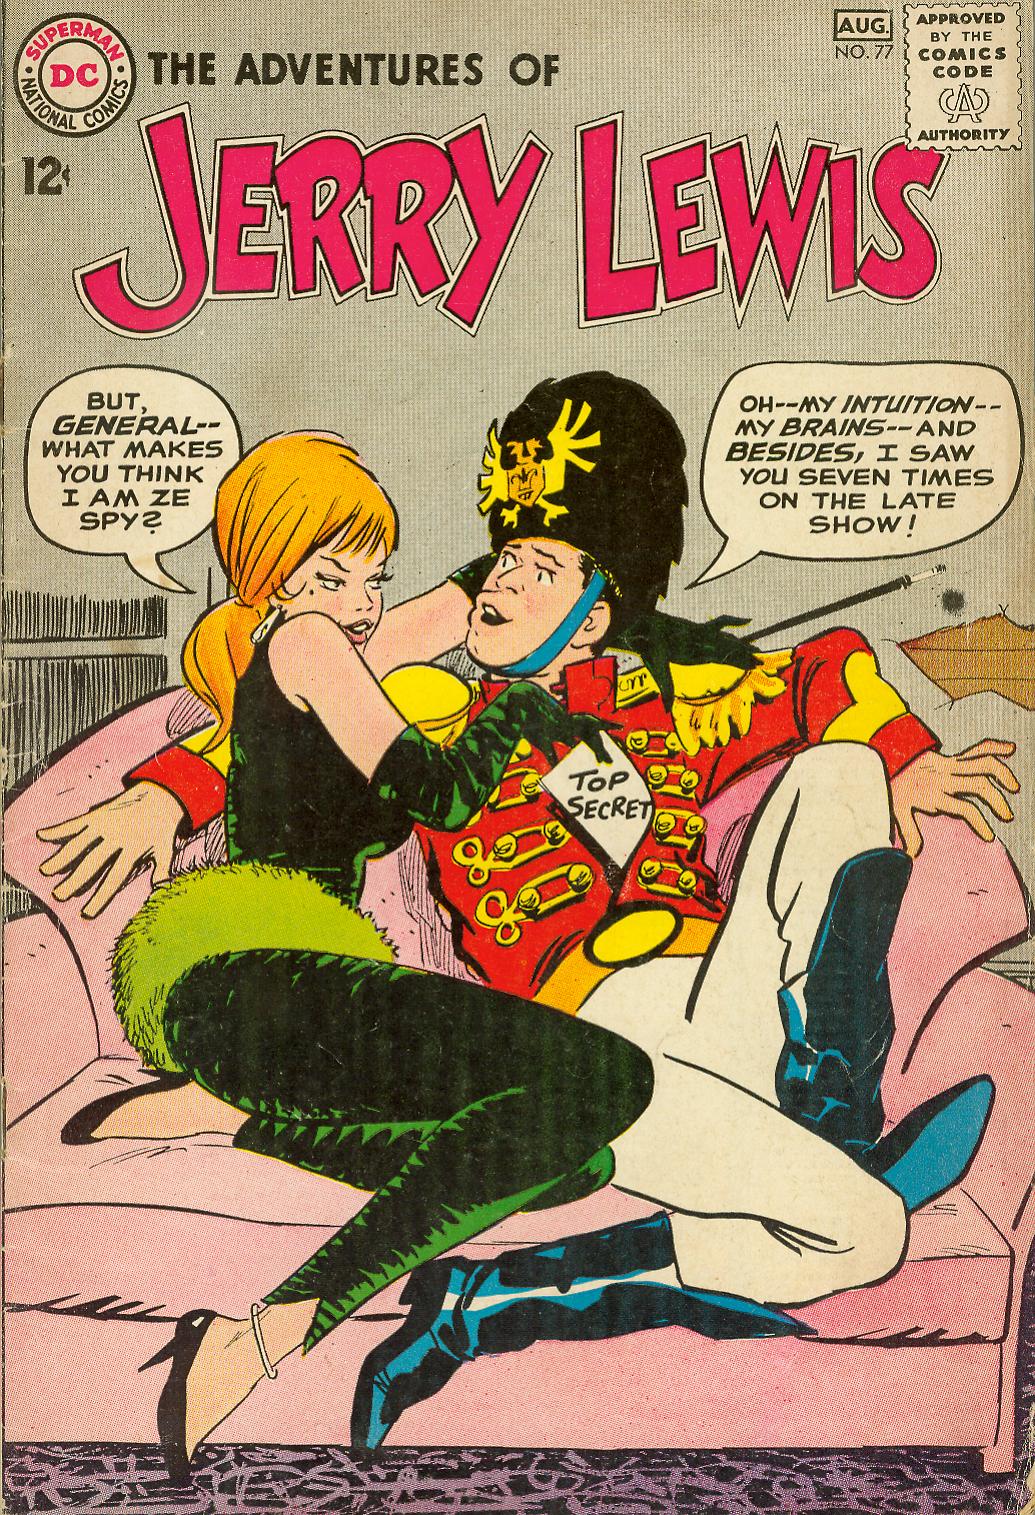 The Adventures of Jerry Lewis 77 Page 1